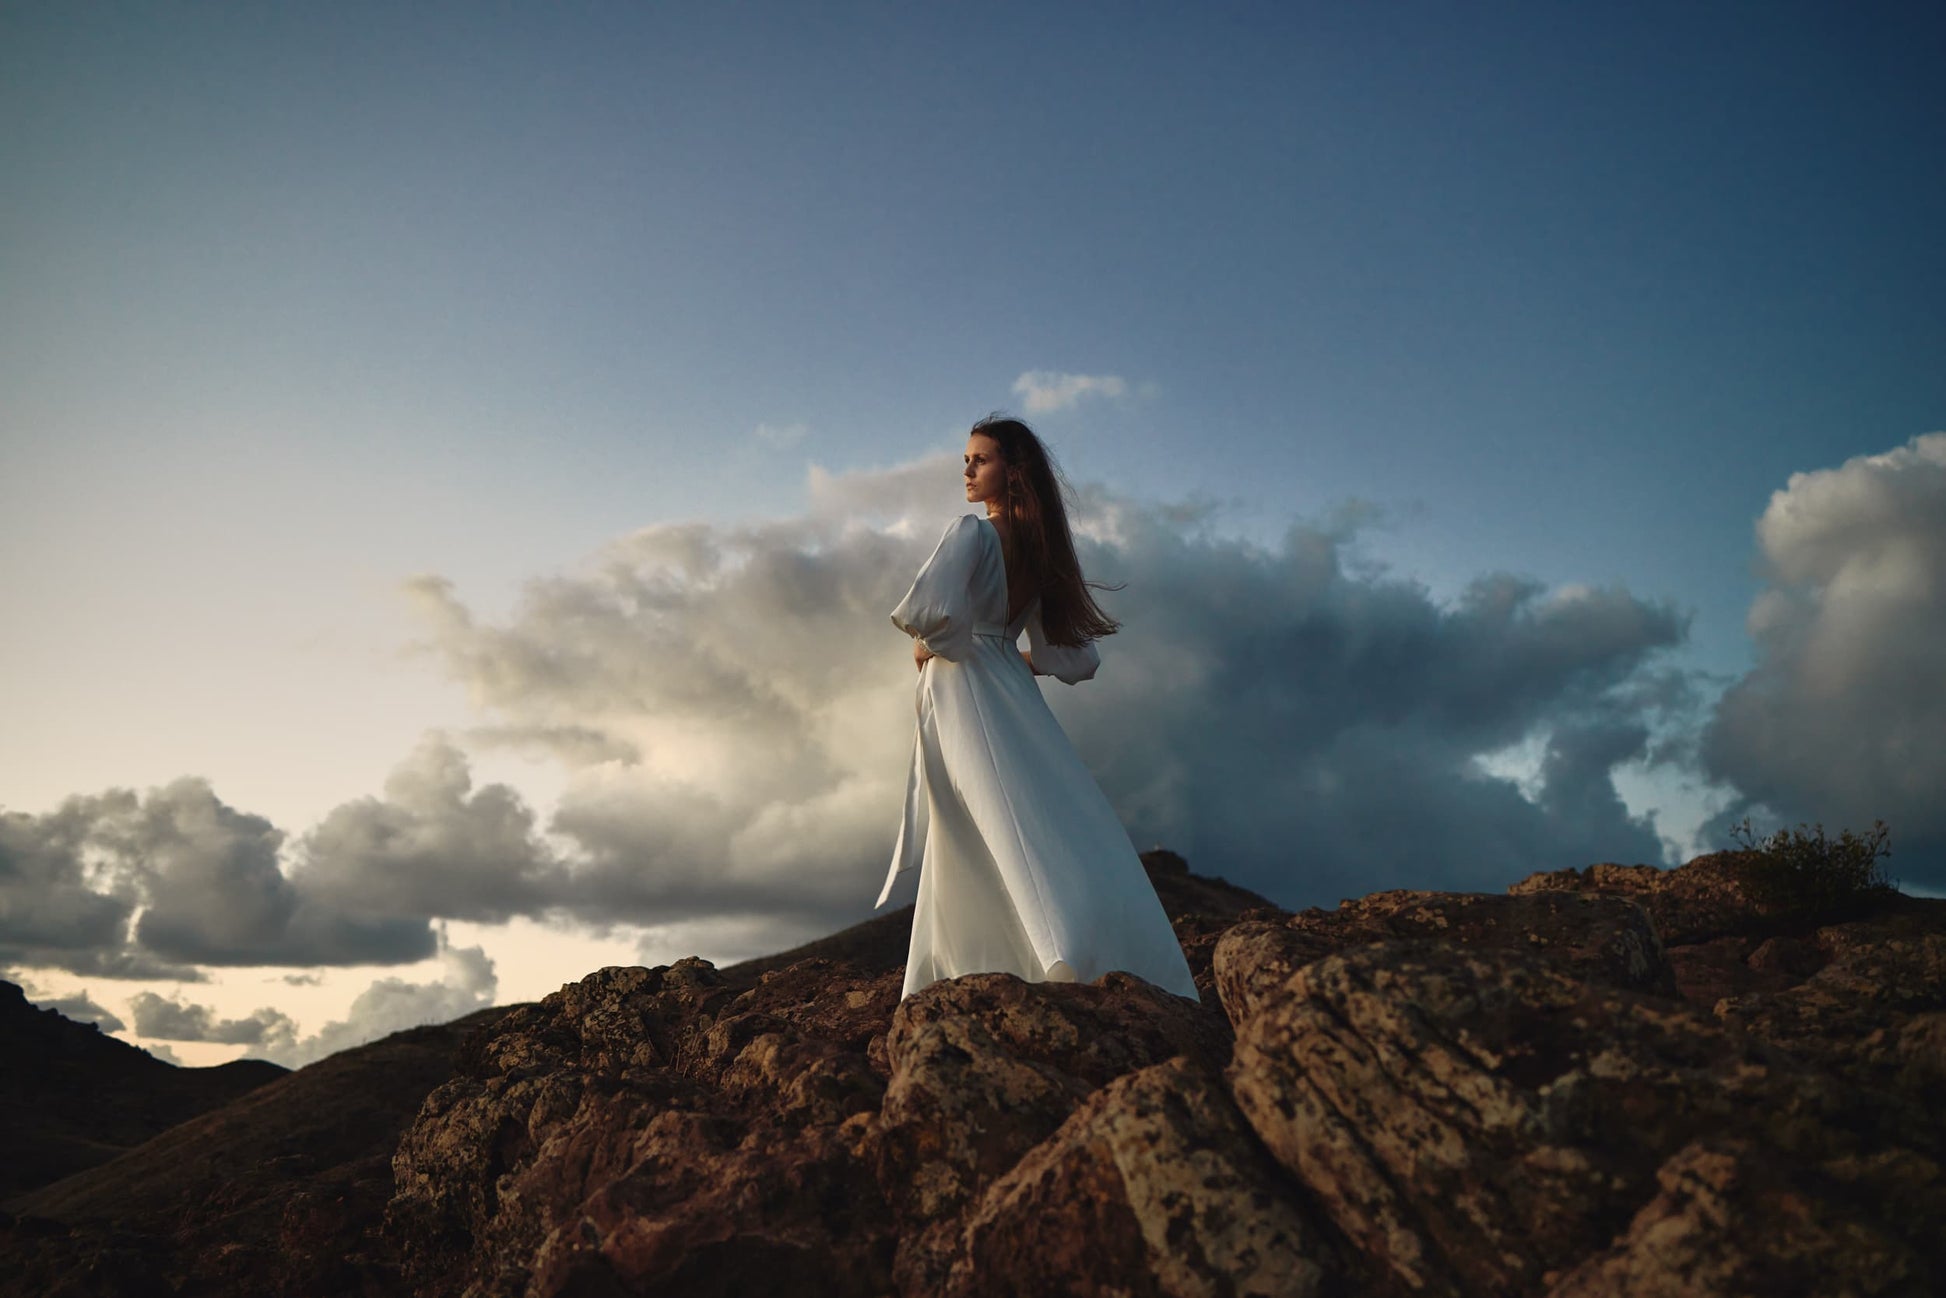 Silhouette of a person standing on a rocky peak at sunset, embodying strength and grace, in a photograph by Celin May.